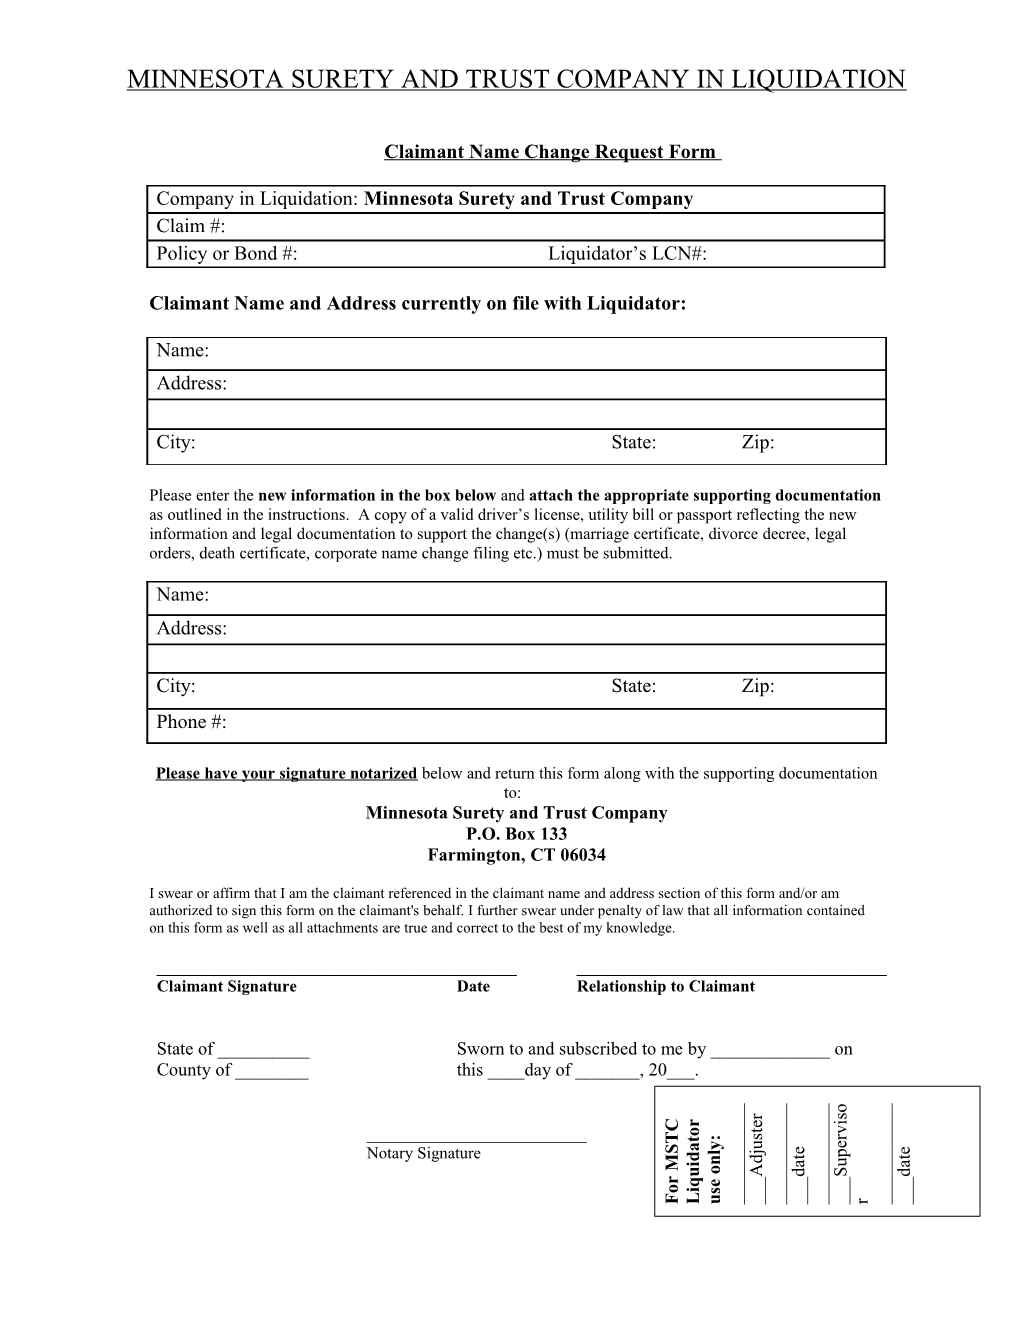 Claim Distribution Form for Company Name in Liquidation